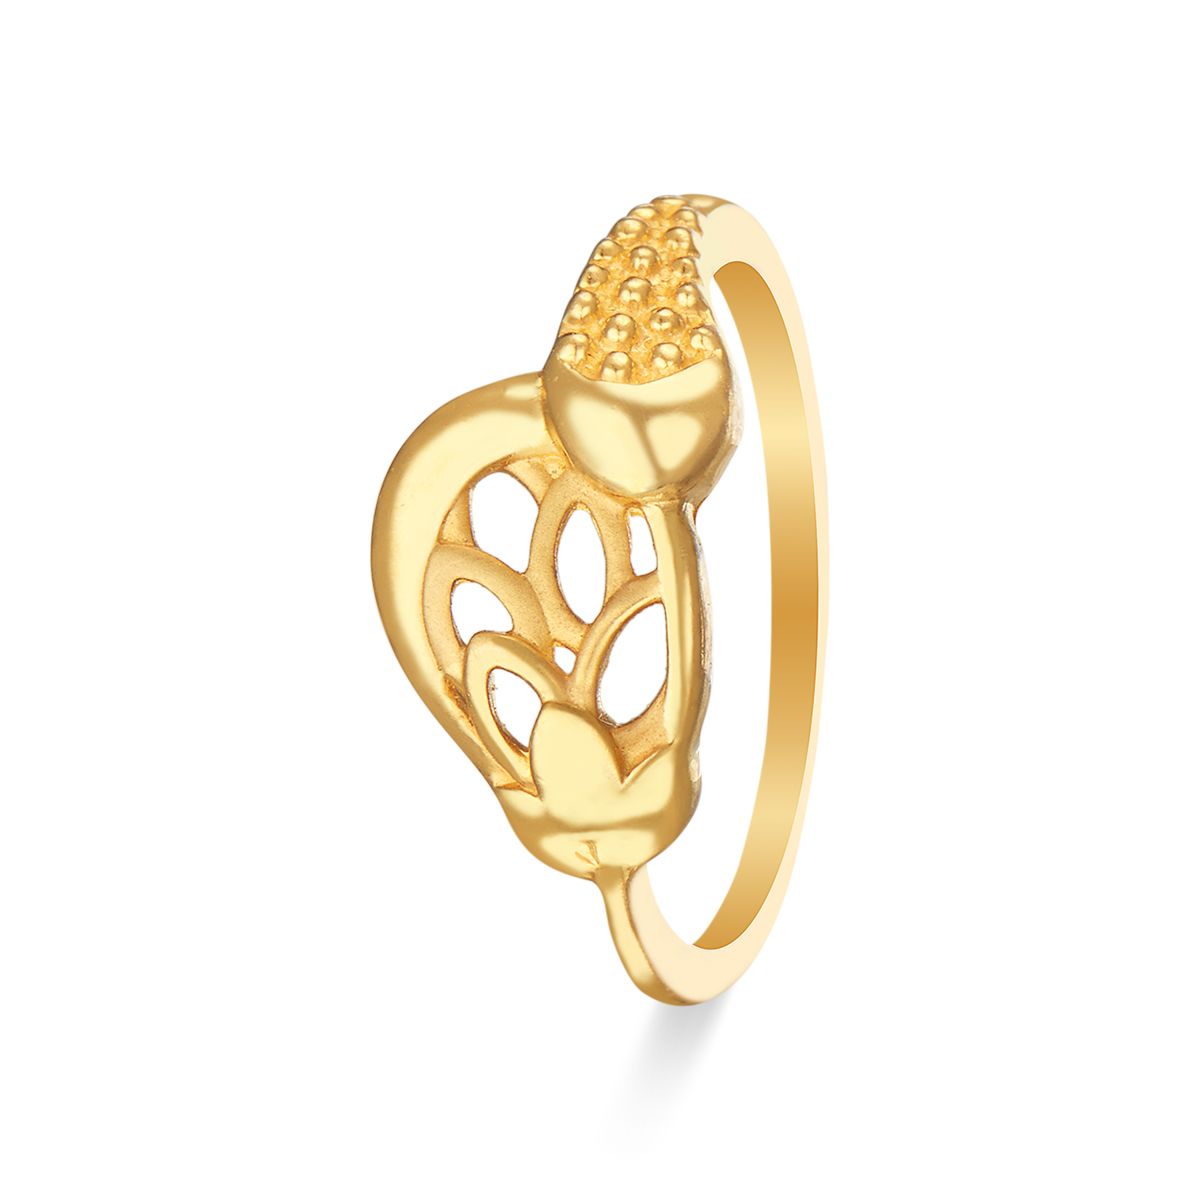 Attractive Stylish Gold Ring